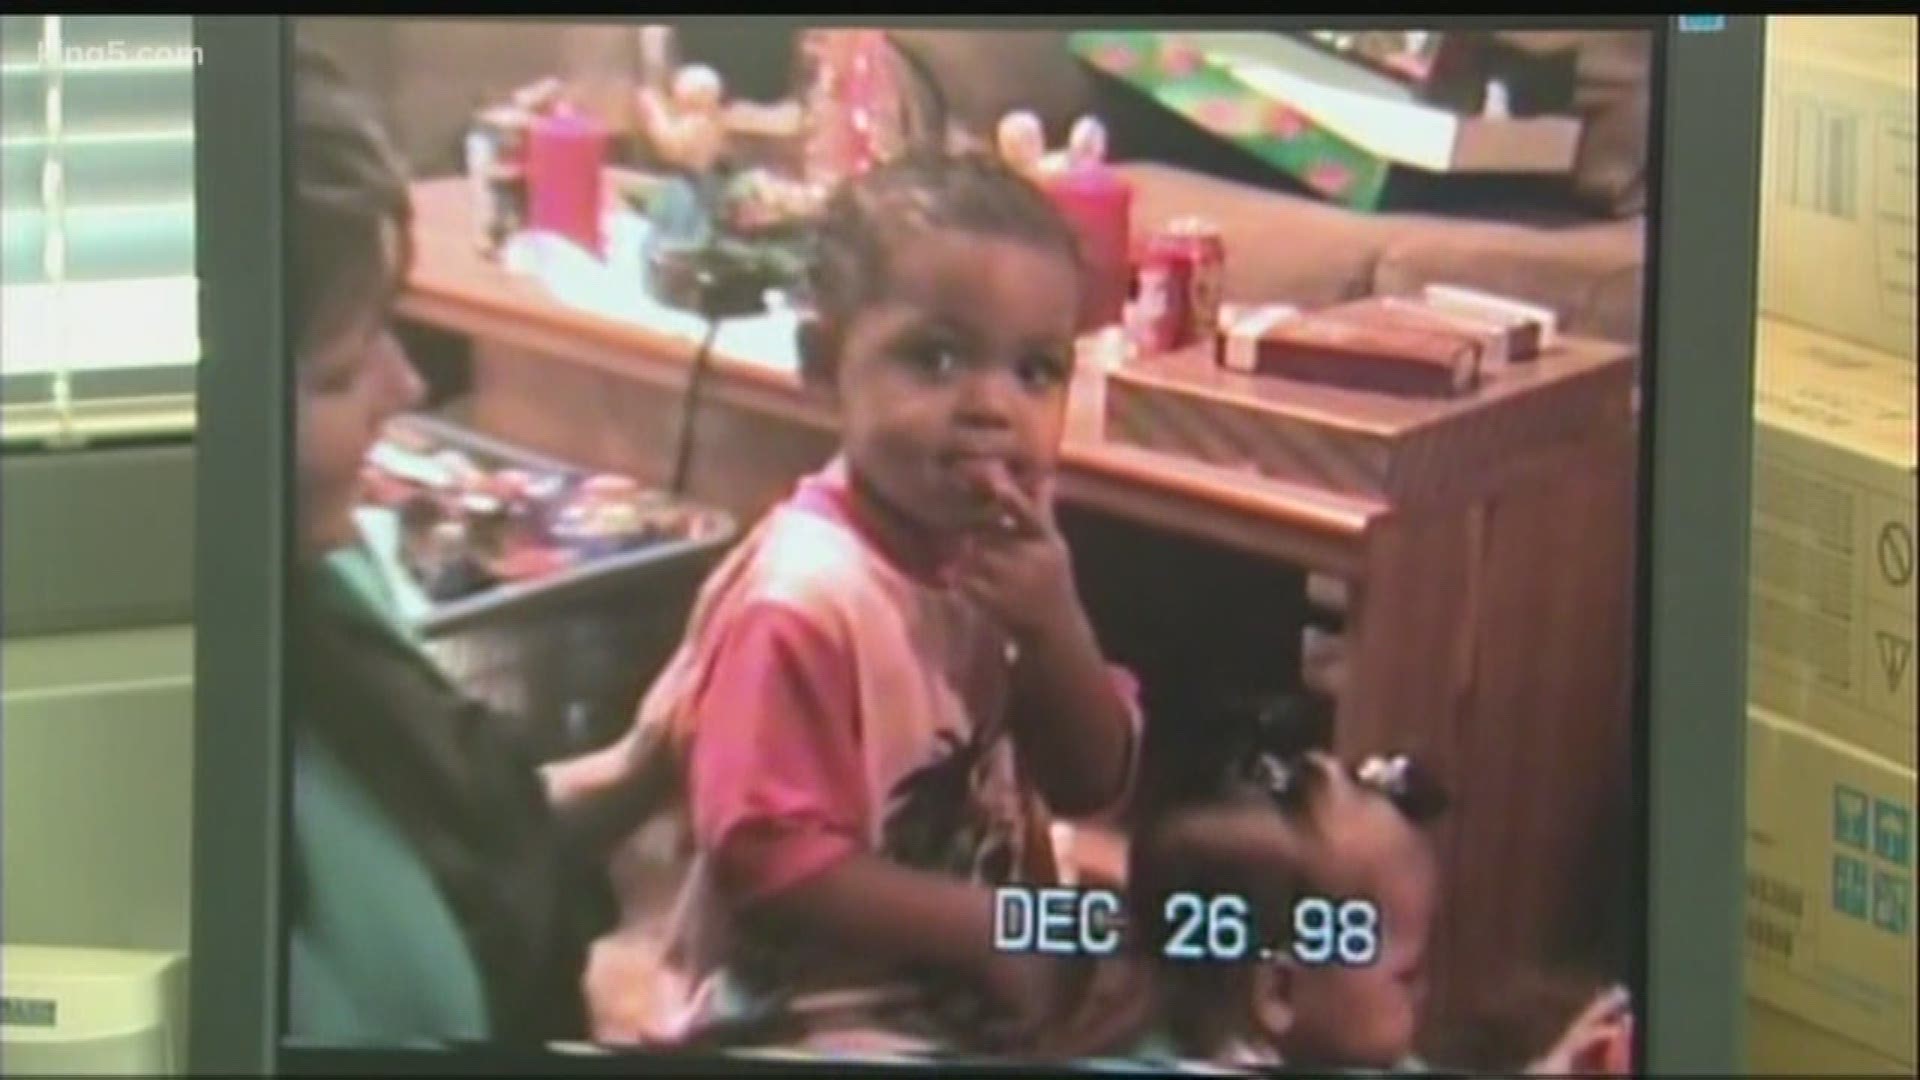 It's been 21 years since a toddler was kidnapped from a bowling alley in Tacoma.